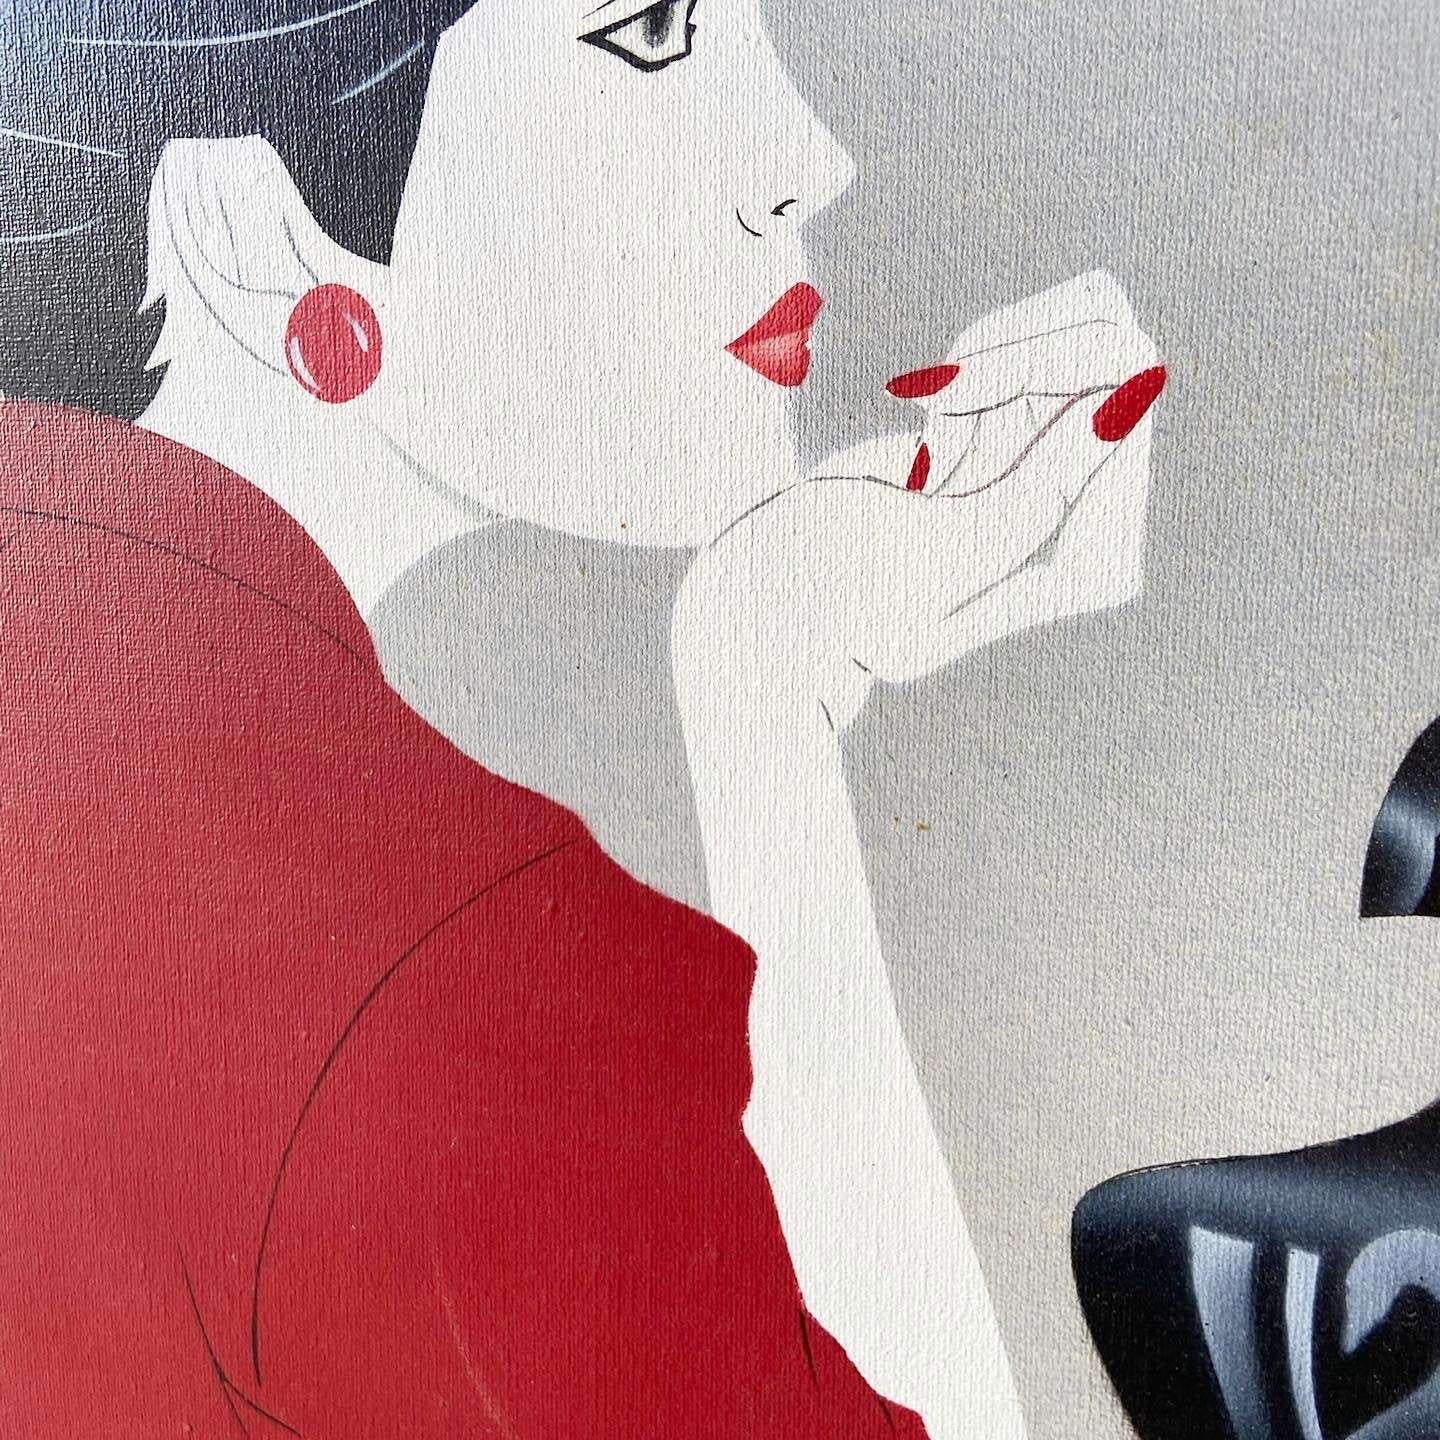 Art Deco Oil Painting Reproduction of “Suzanne” by Robert Blue, Nagel Style For Sale 1